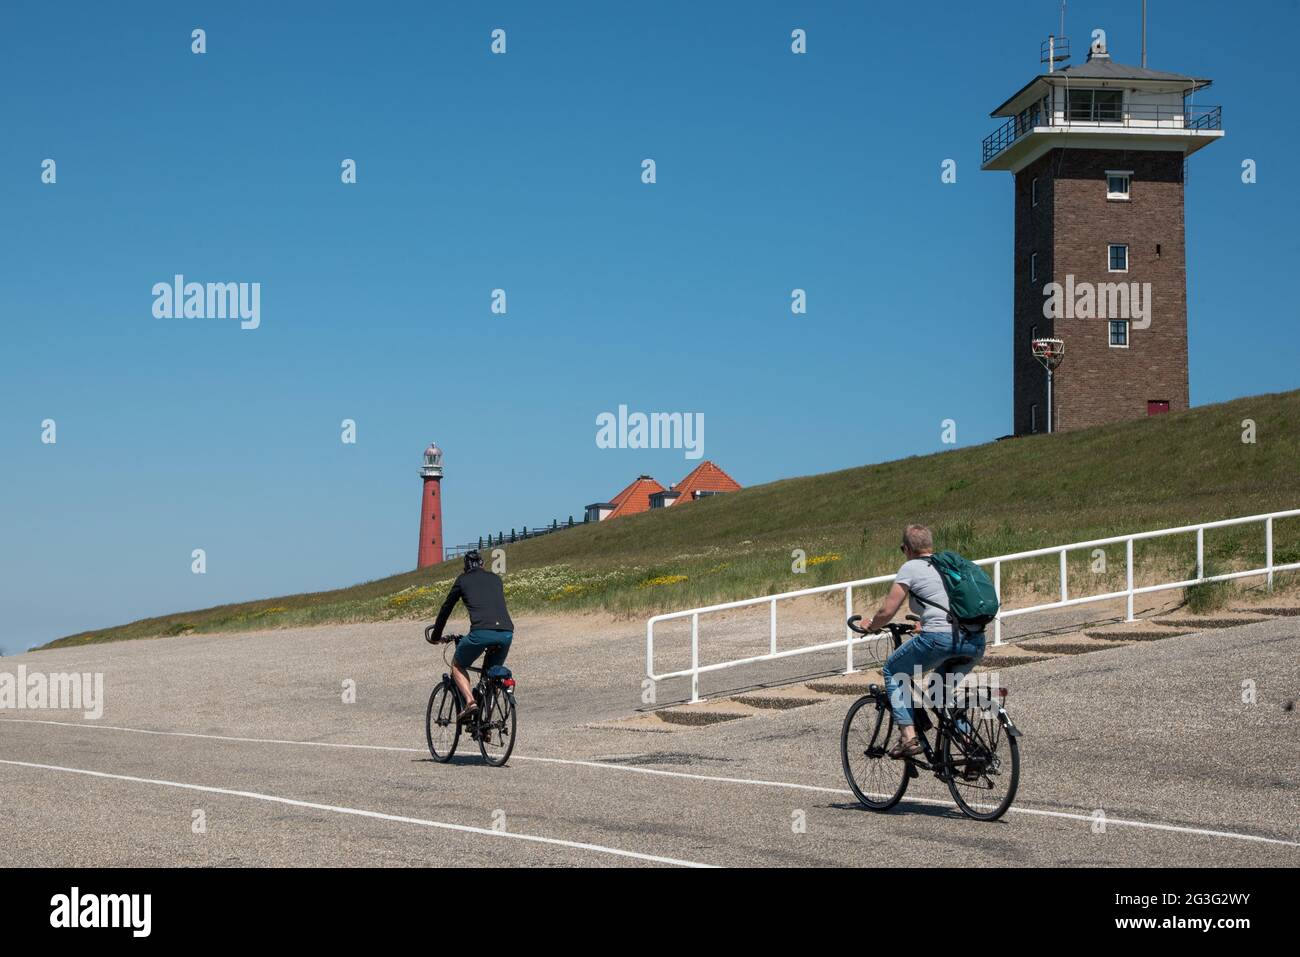 Cyclists on the dike near Huisduinen, Den Helder, with Lange Jaap lighthouse and the coast guard tower in the background. High quality photo Stock Photo